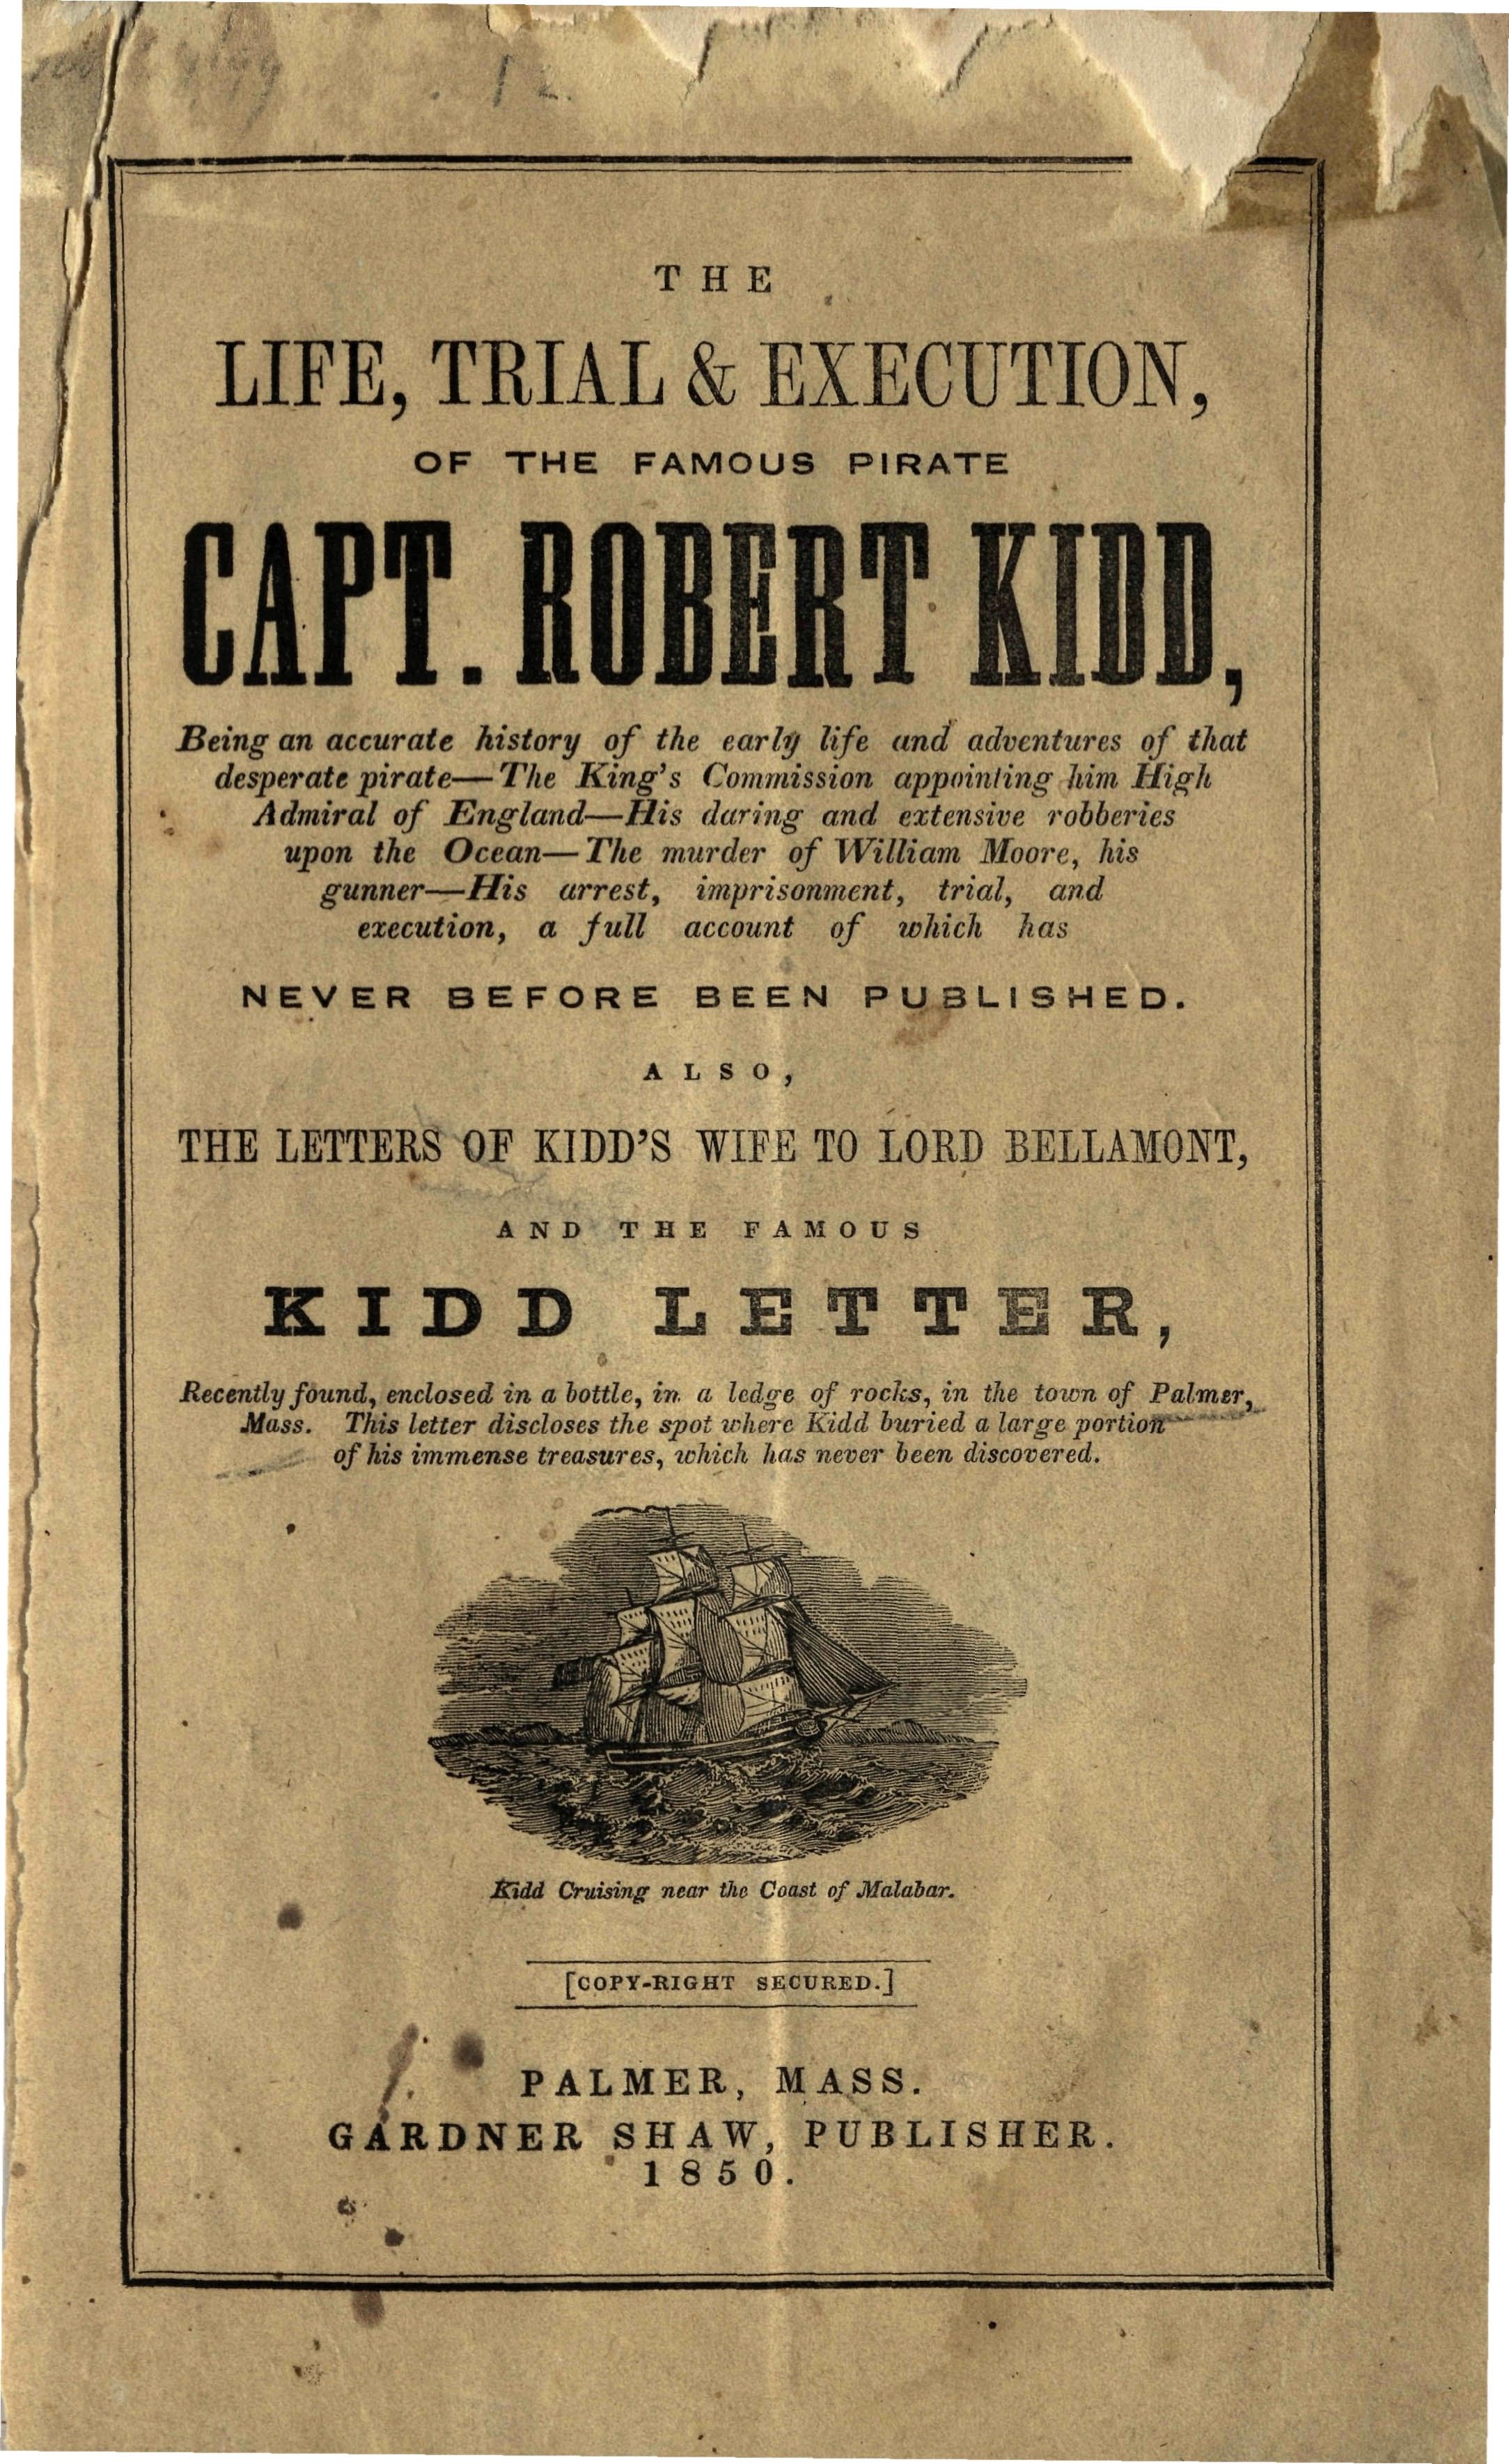 The Life, trail & execution, of the famous pirate Capt. Robert Kidd… (1850)  American Pamphlets from the New -York Historical Society, from Readex